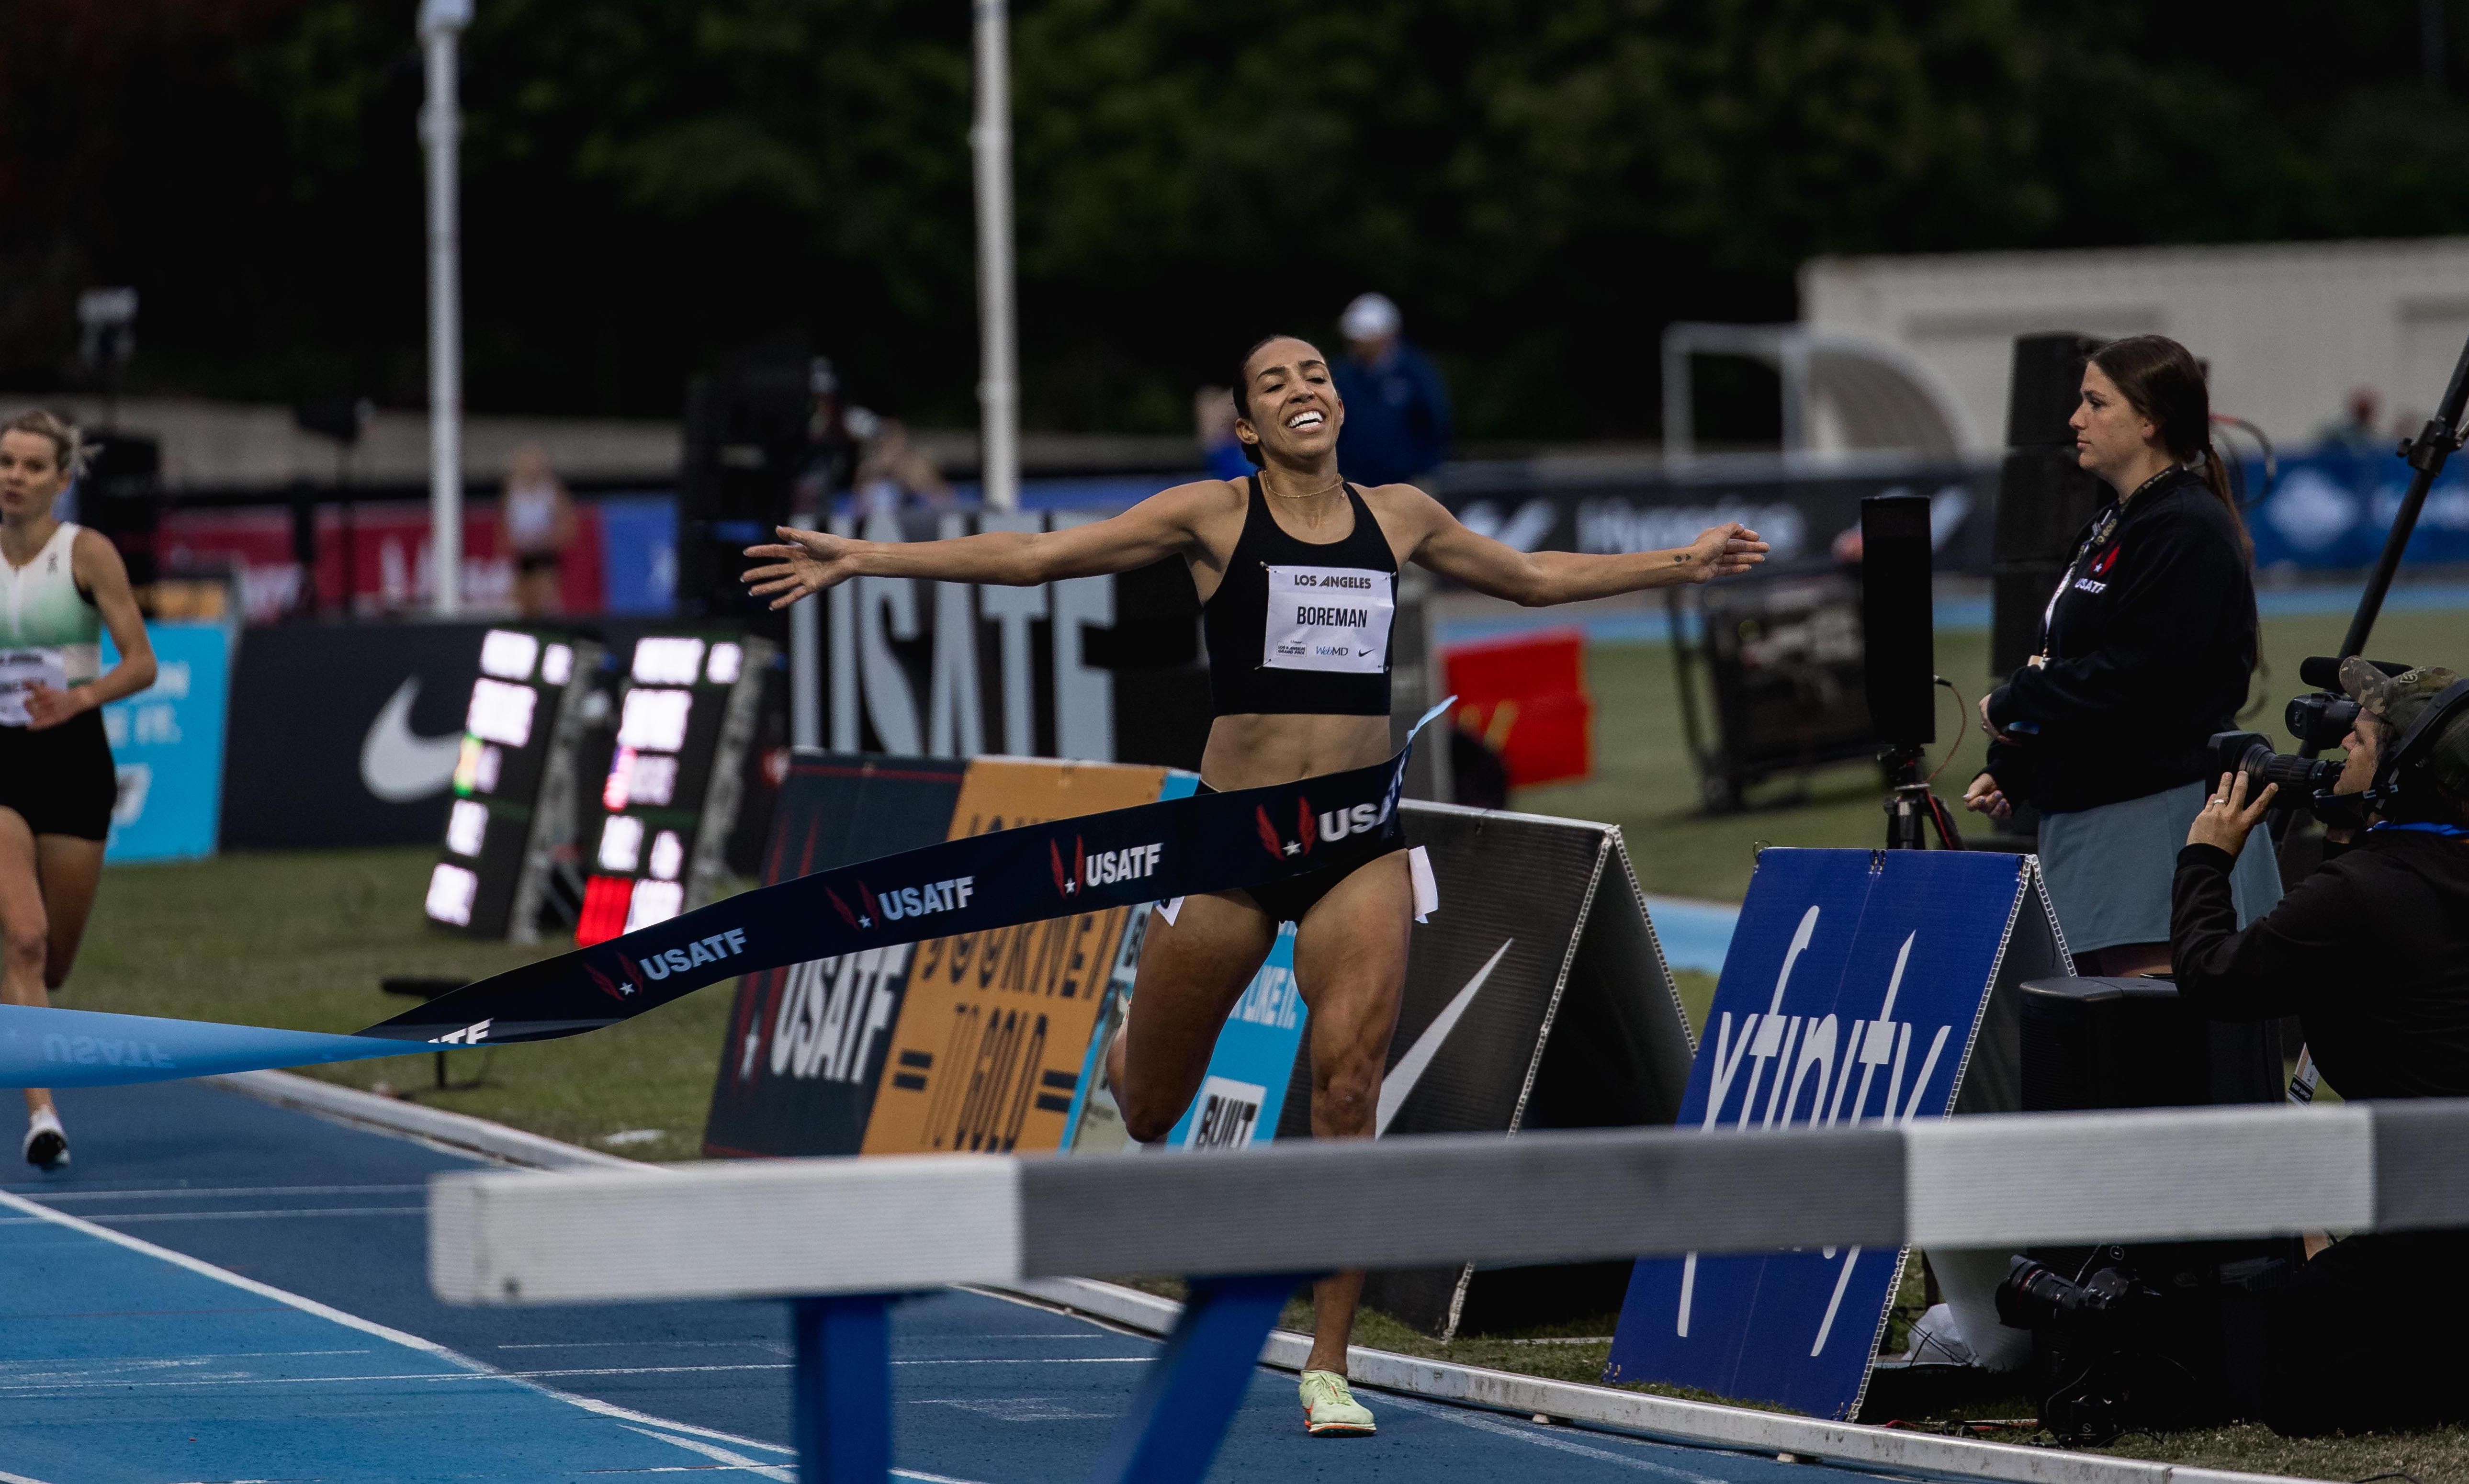 Constien finishes eighth at USATF outdoor track and field 3000-meter  steeplechase final